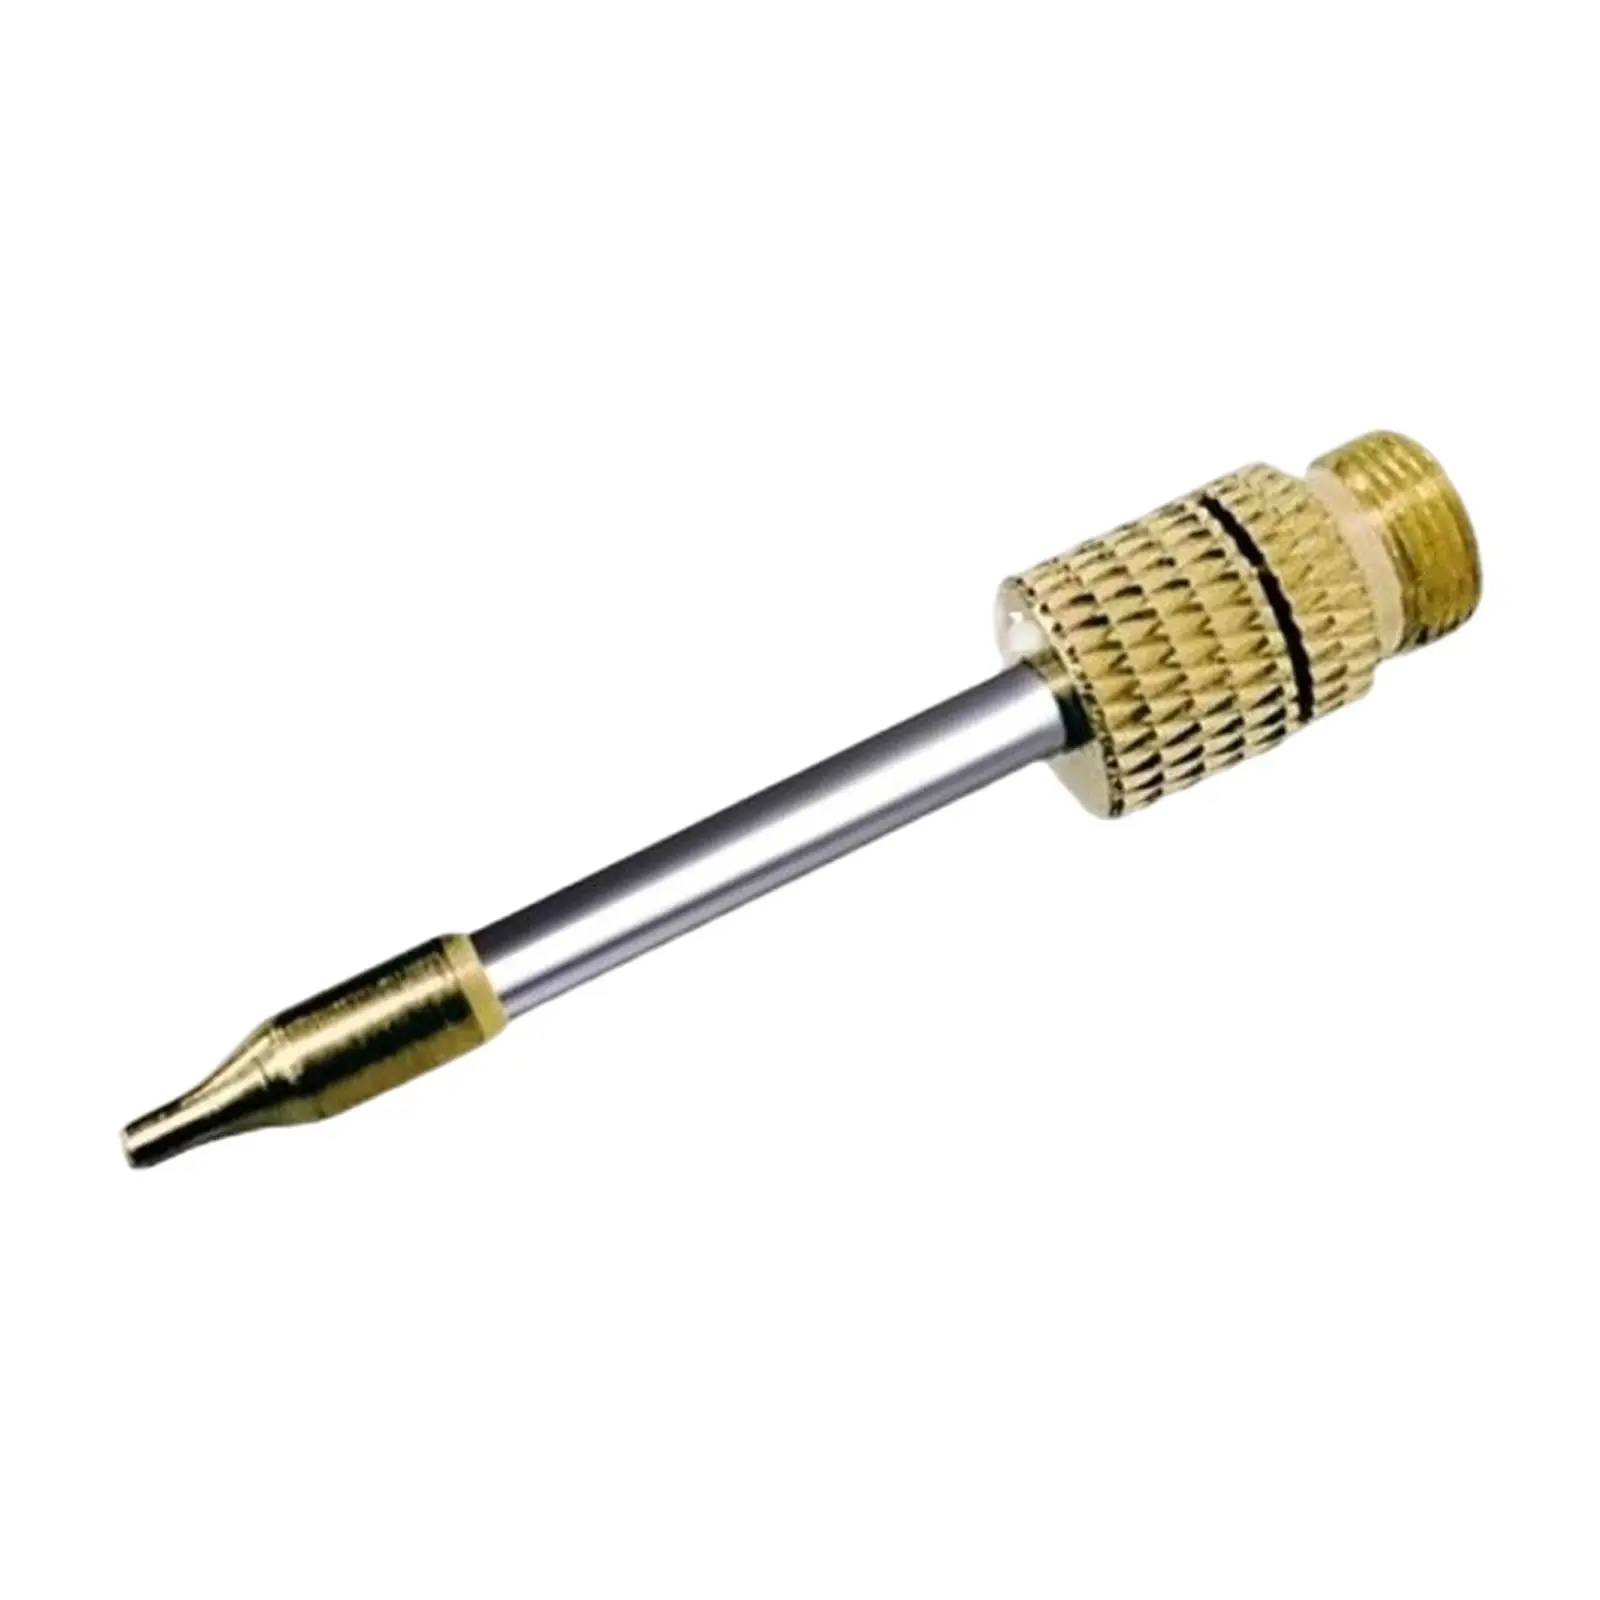 Welding Soldering Tips for Electric Solder Iron Replace Accessories Repair